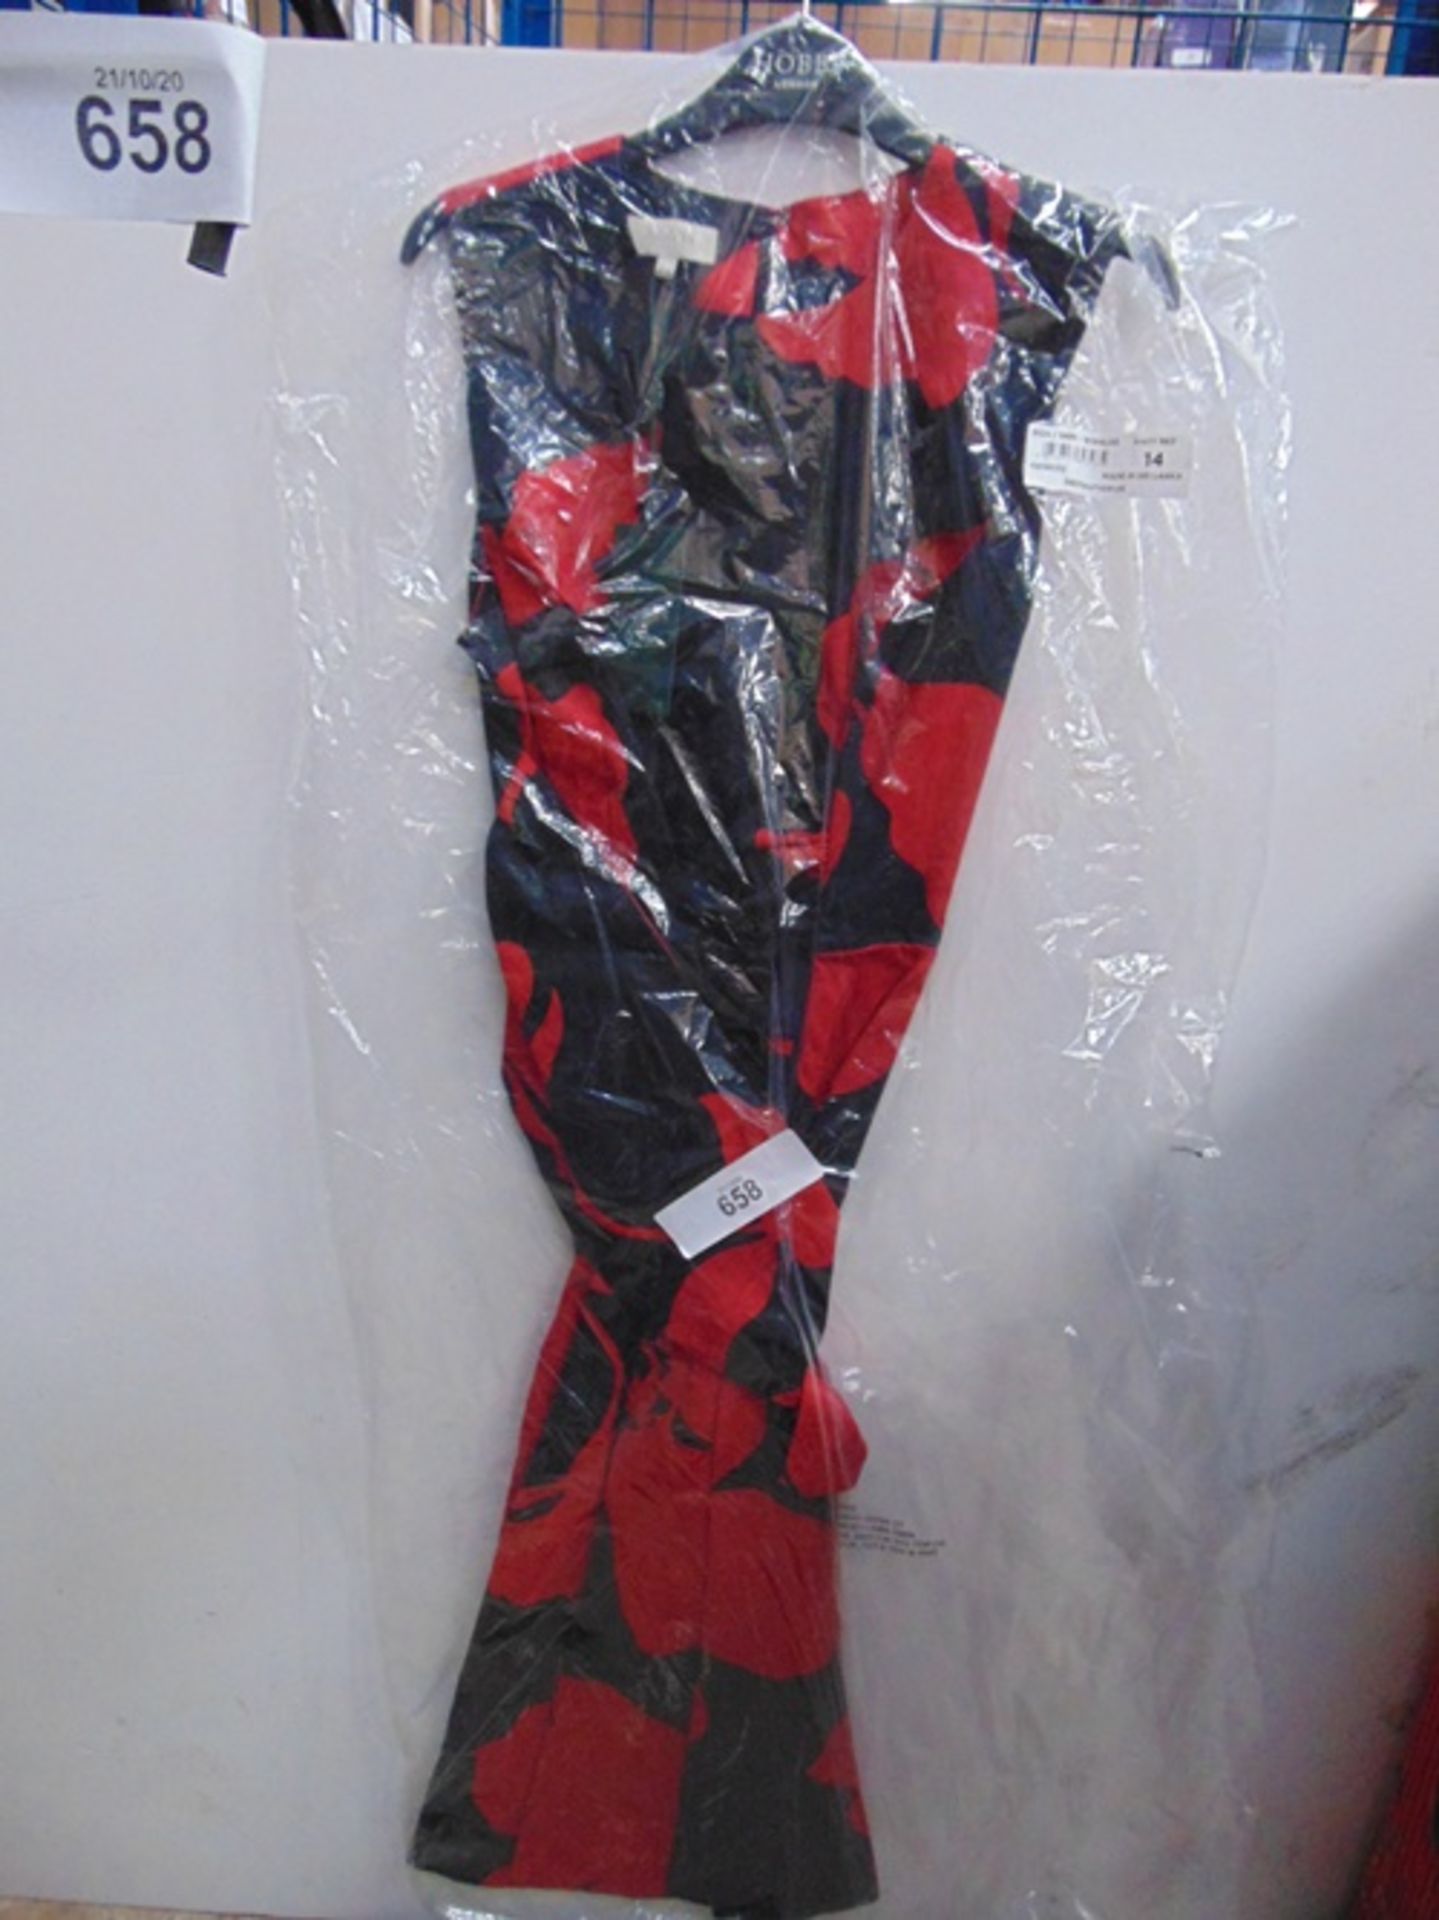 2 x Hobbs Twitchill linen dresses, size 18 & 14, red and black, RRP £129.00 - New (ES16B) - Image 2 of 3